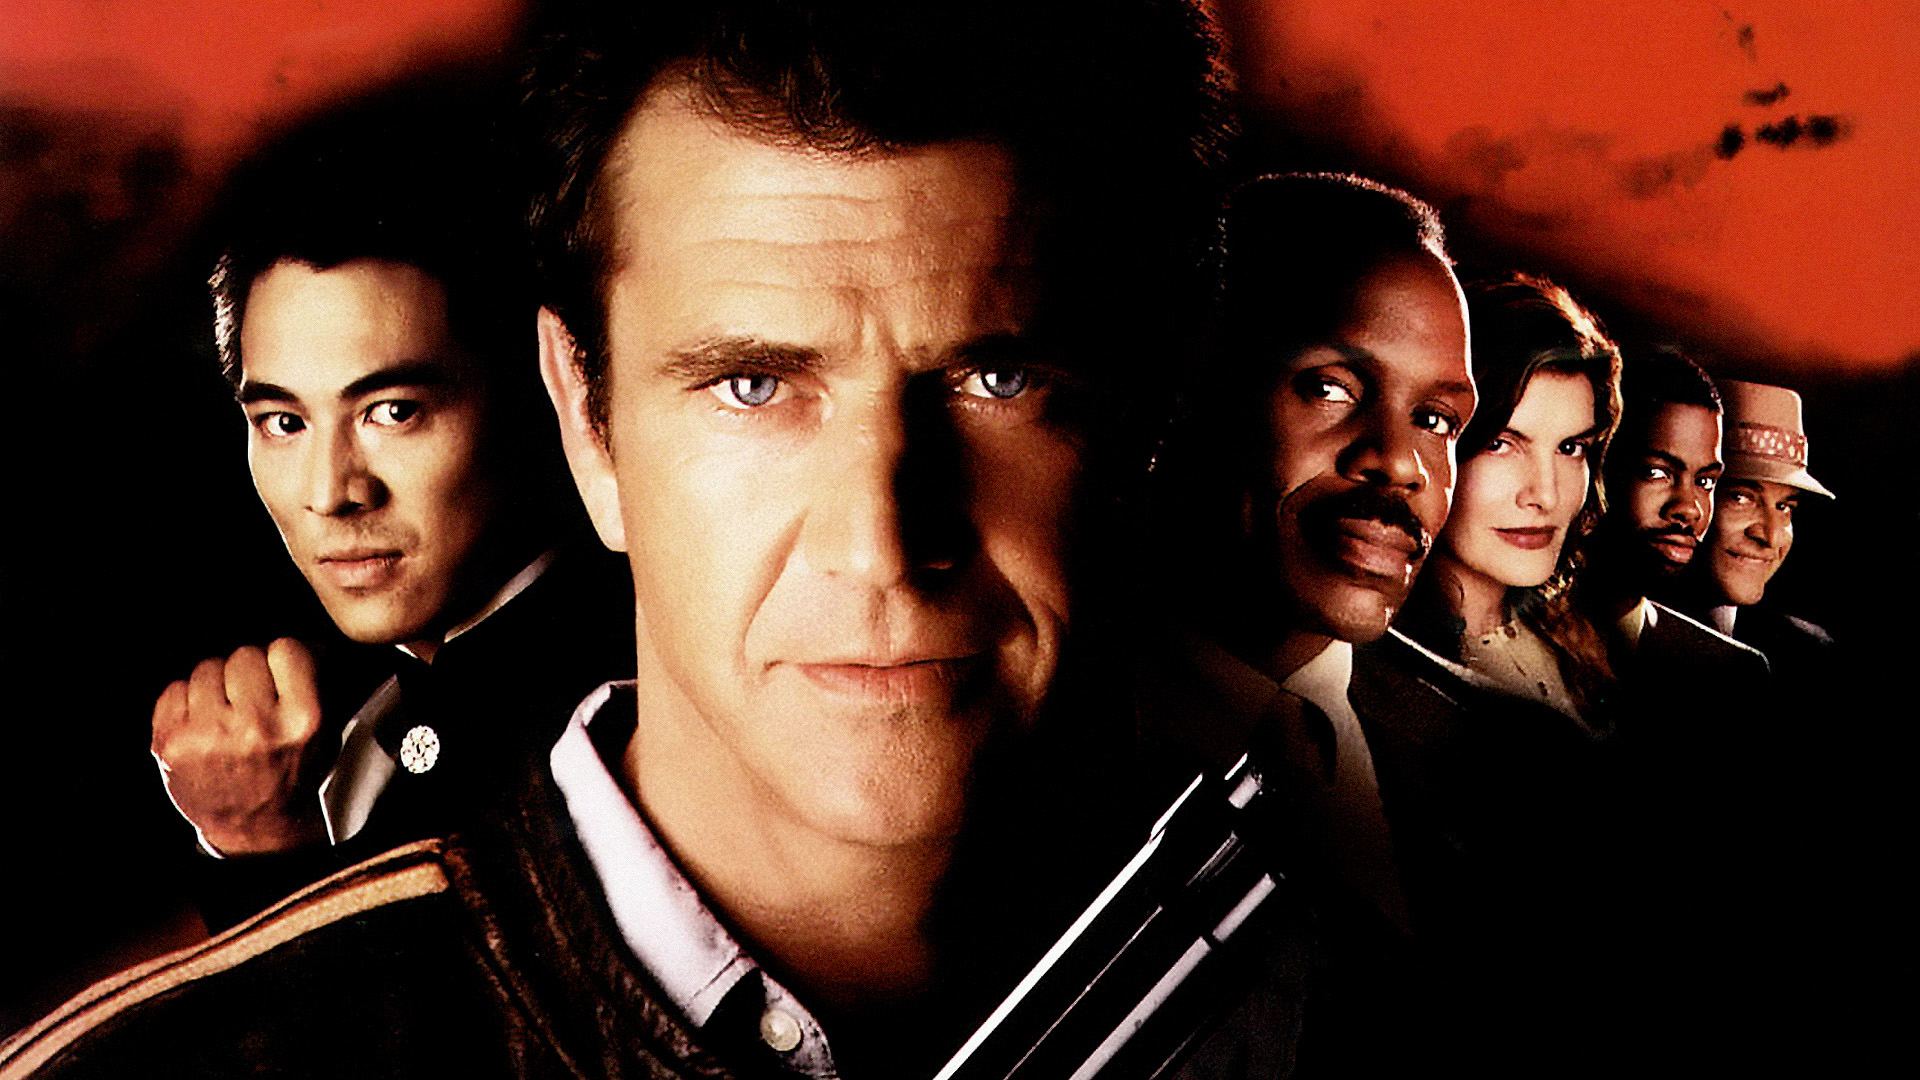 Movie Lethal Weapon 4 HD Wallpaper | Background Image